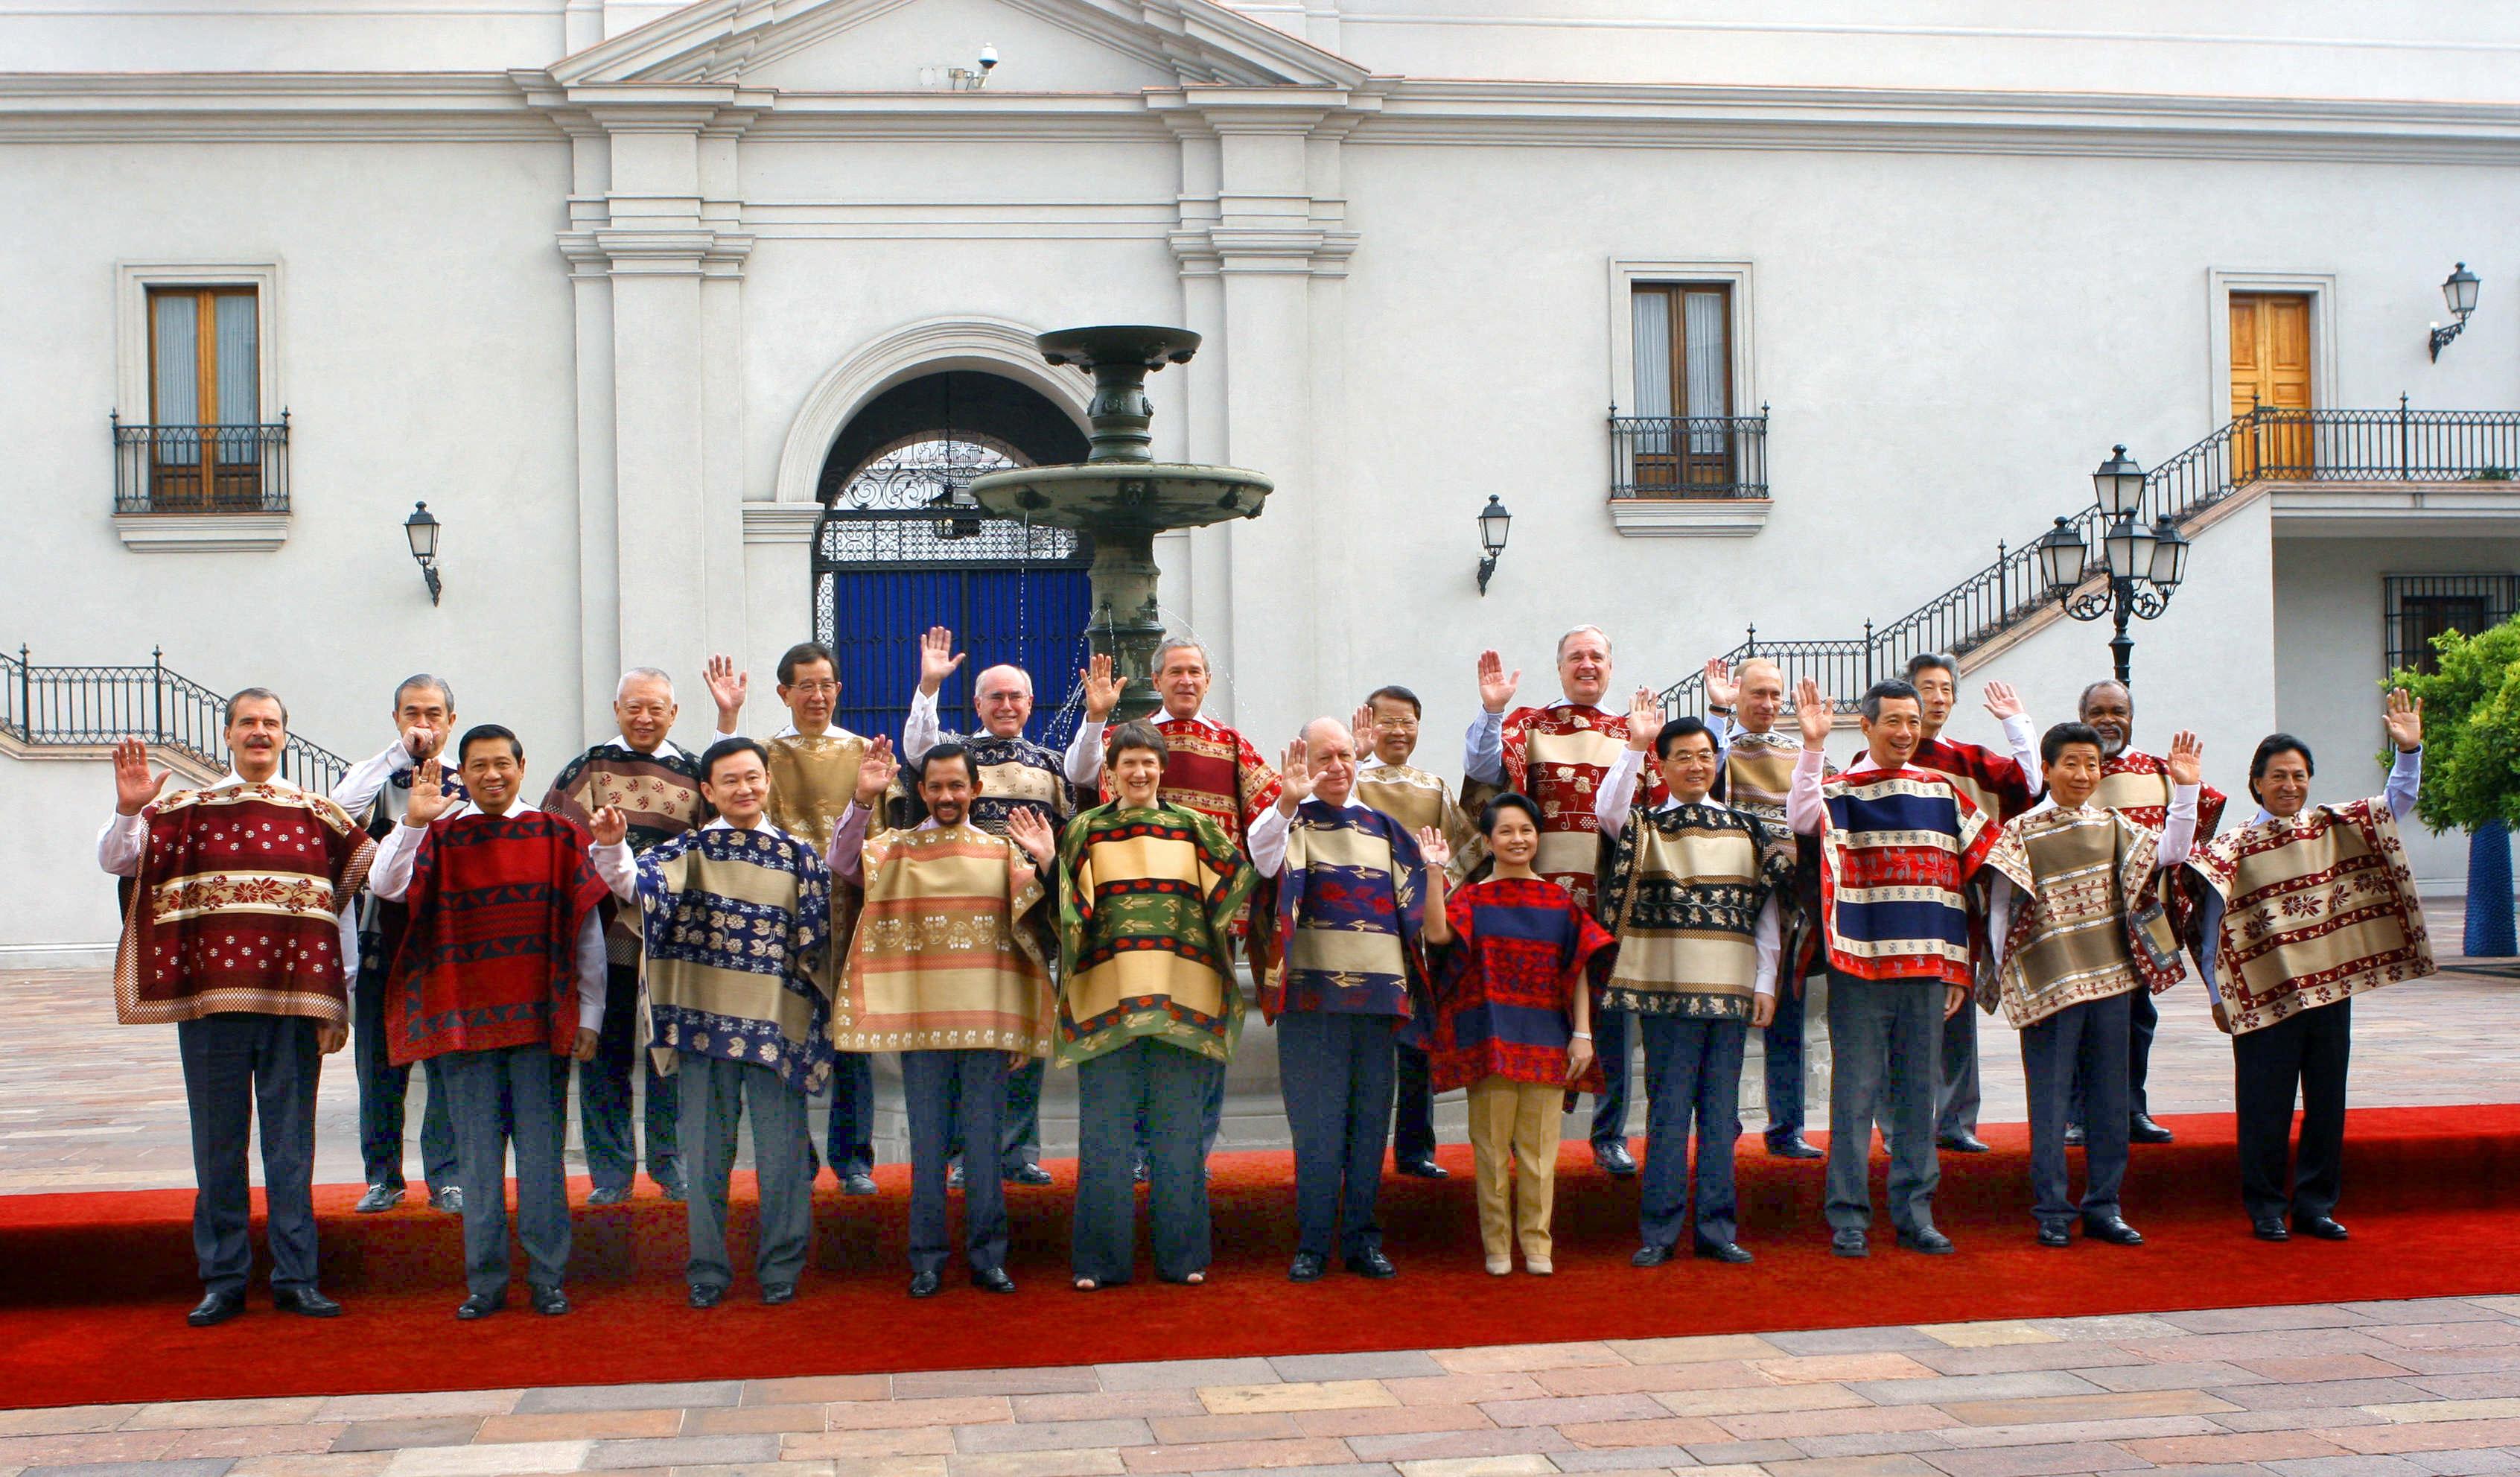 World leaders pose for a group photo while wearing traditional Chilean clothing.